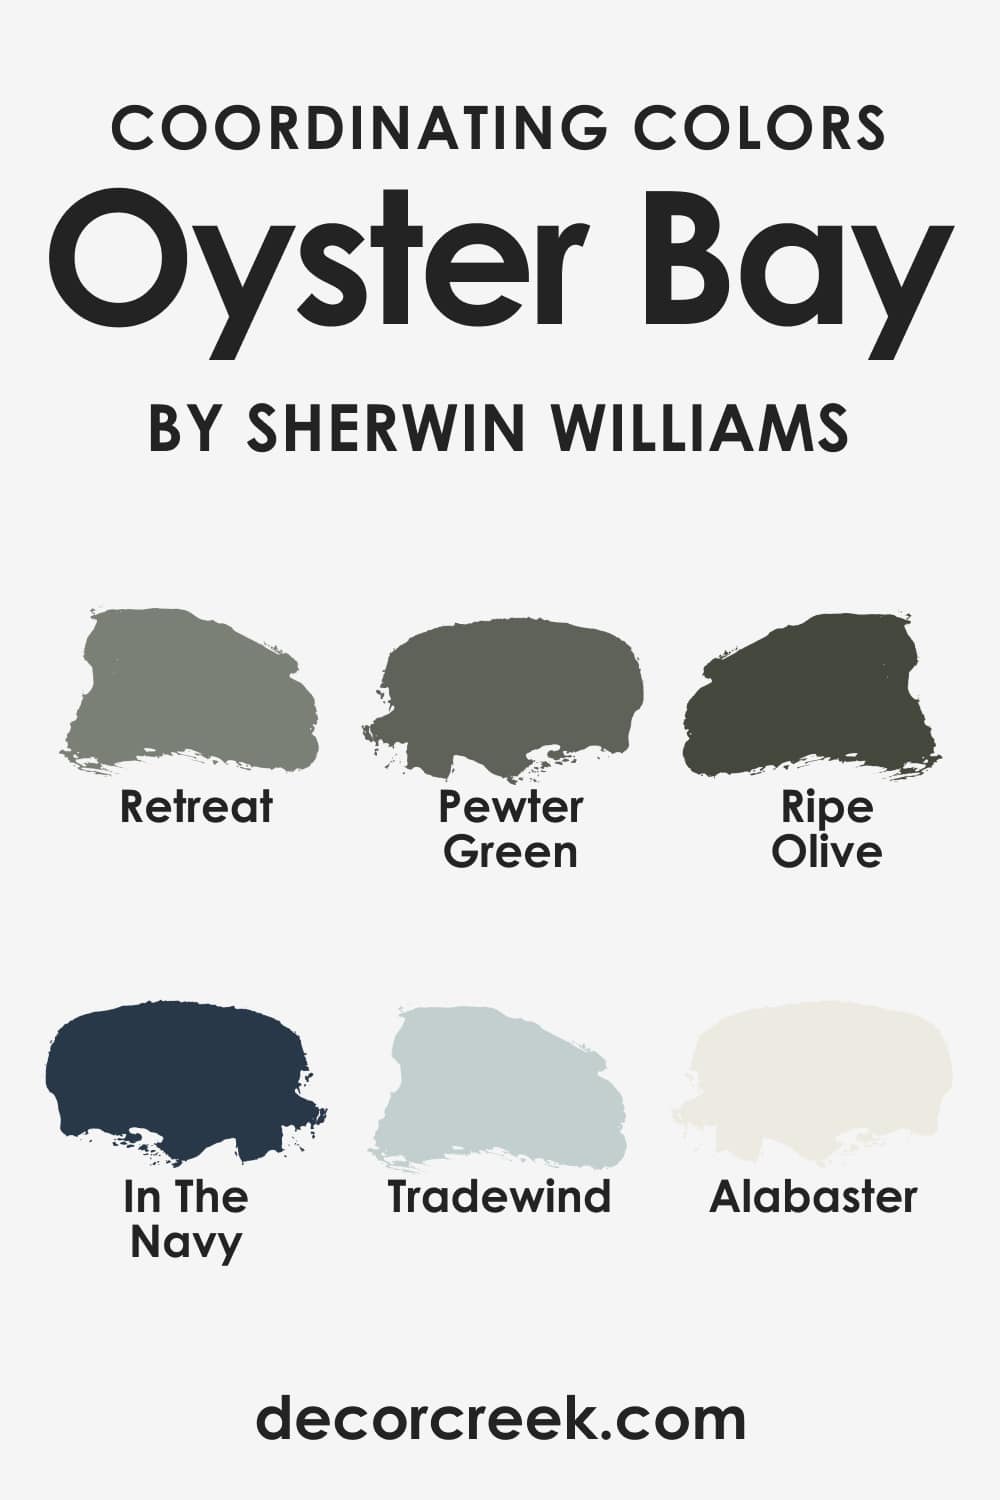 Oyster Bay SW-6206 Coordinating Colors